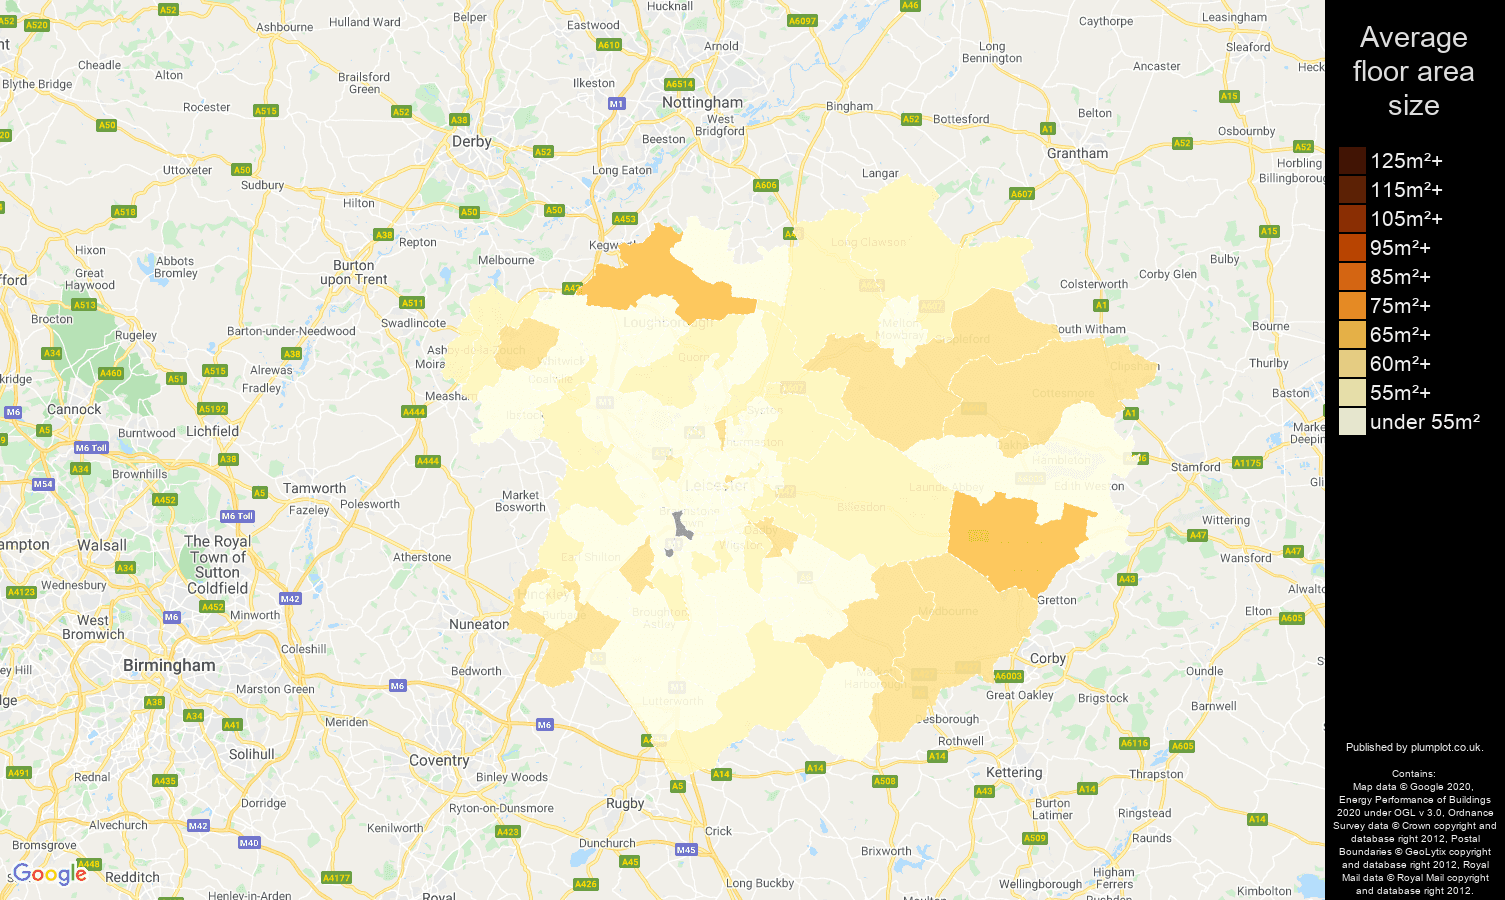 Leicester map of average floor area size of flats